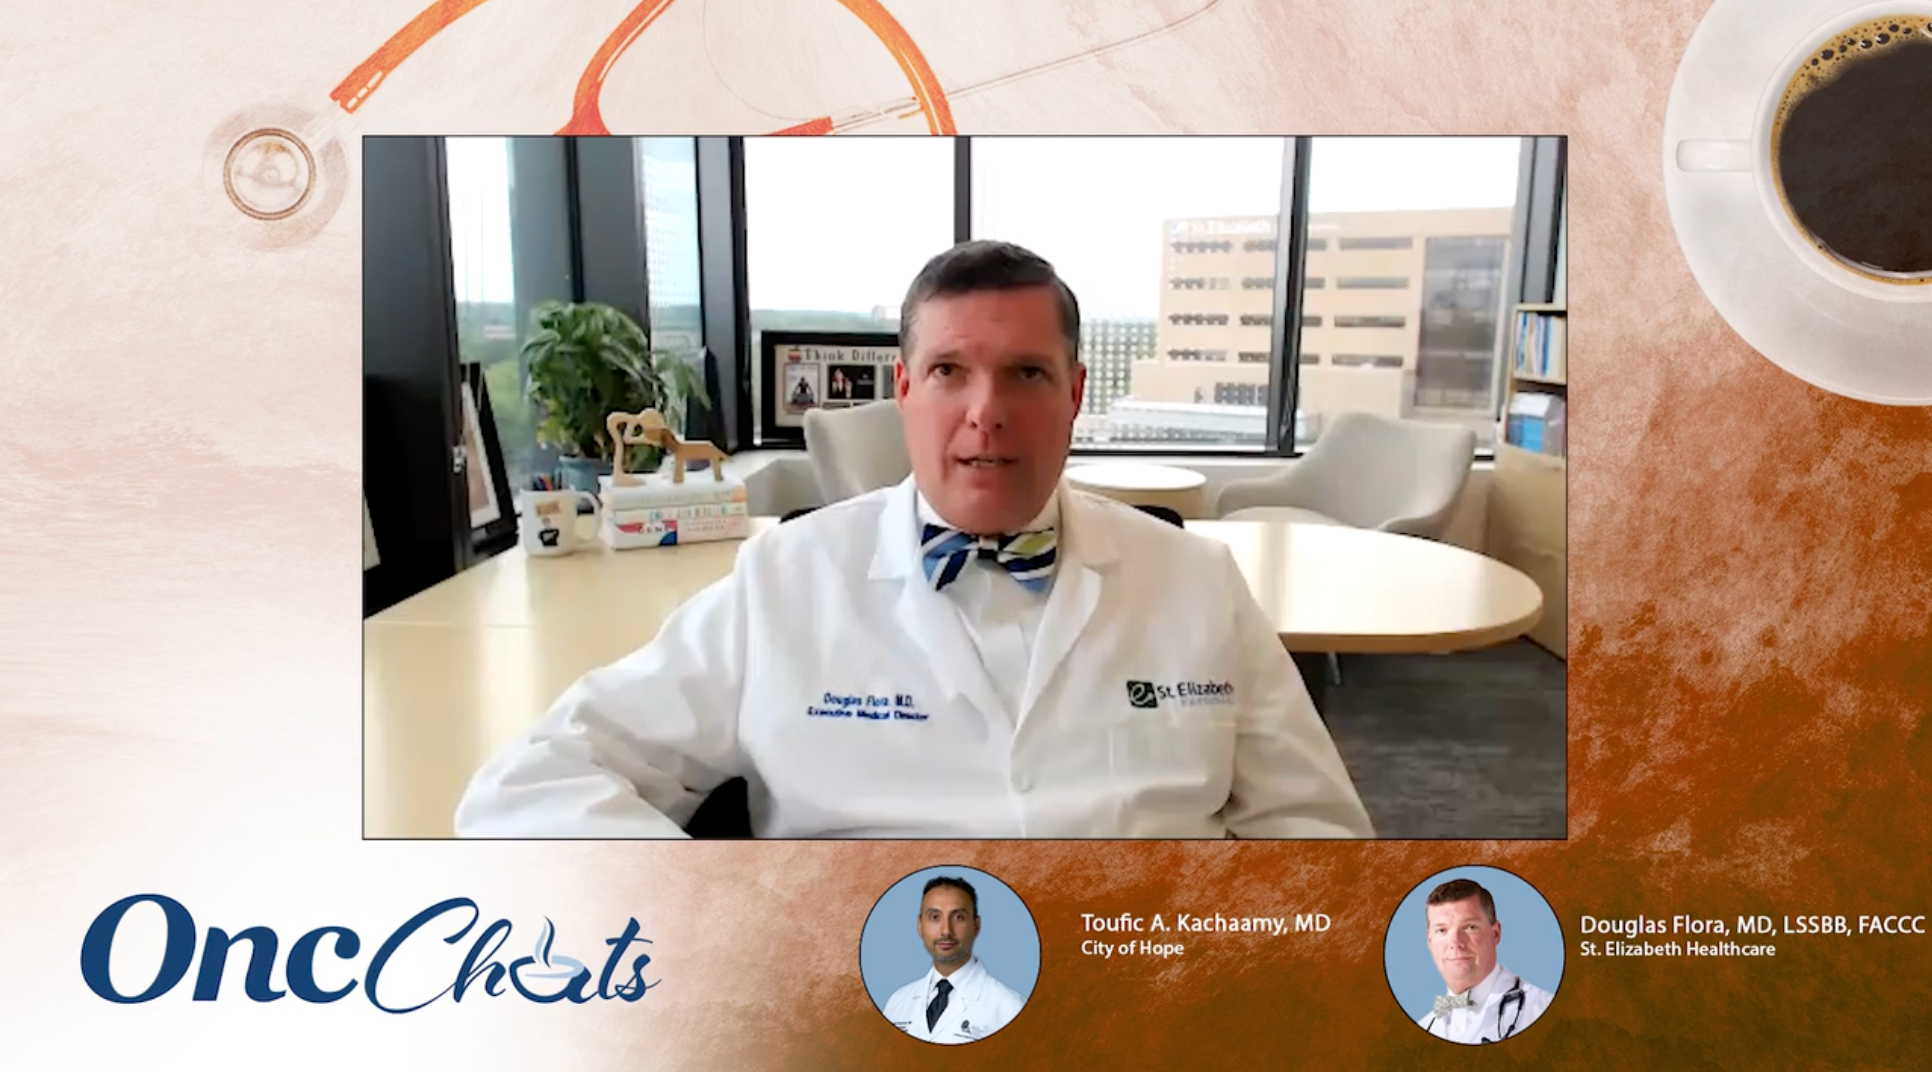 In this second episode of OncChats: Assessing the Promise of AI in Oncology, Toufic A. Kachaamy, MD, and Douglas Flora, MD, LSSBB, FACCC, explain how artificial intelligence tools may be leveraged in the oncology field to provide personalized care.